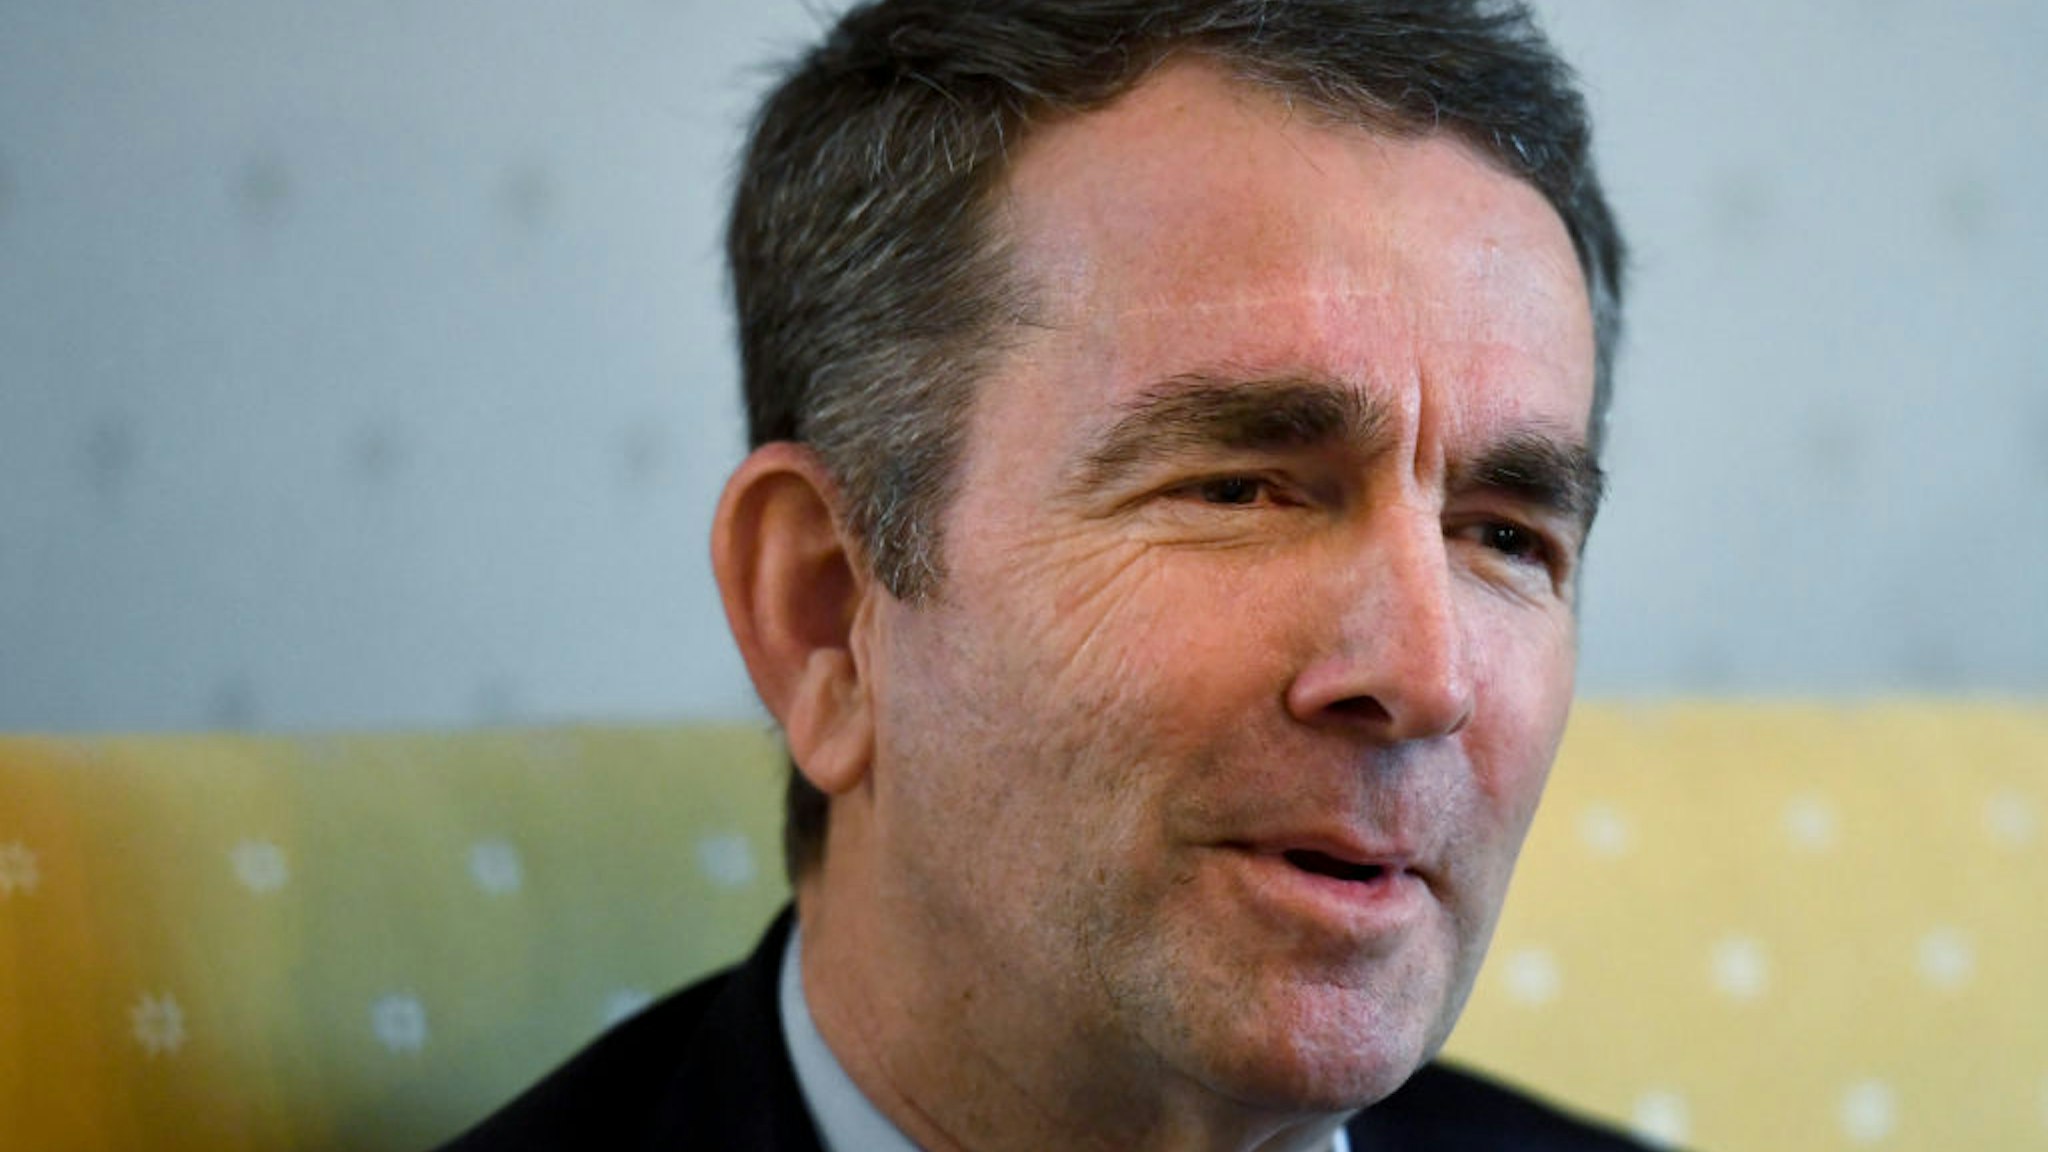 Ralph Northam talks about how he was raised during an interview in the Governor's Mansion February 09, 2019 in Richmond, VA.